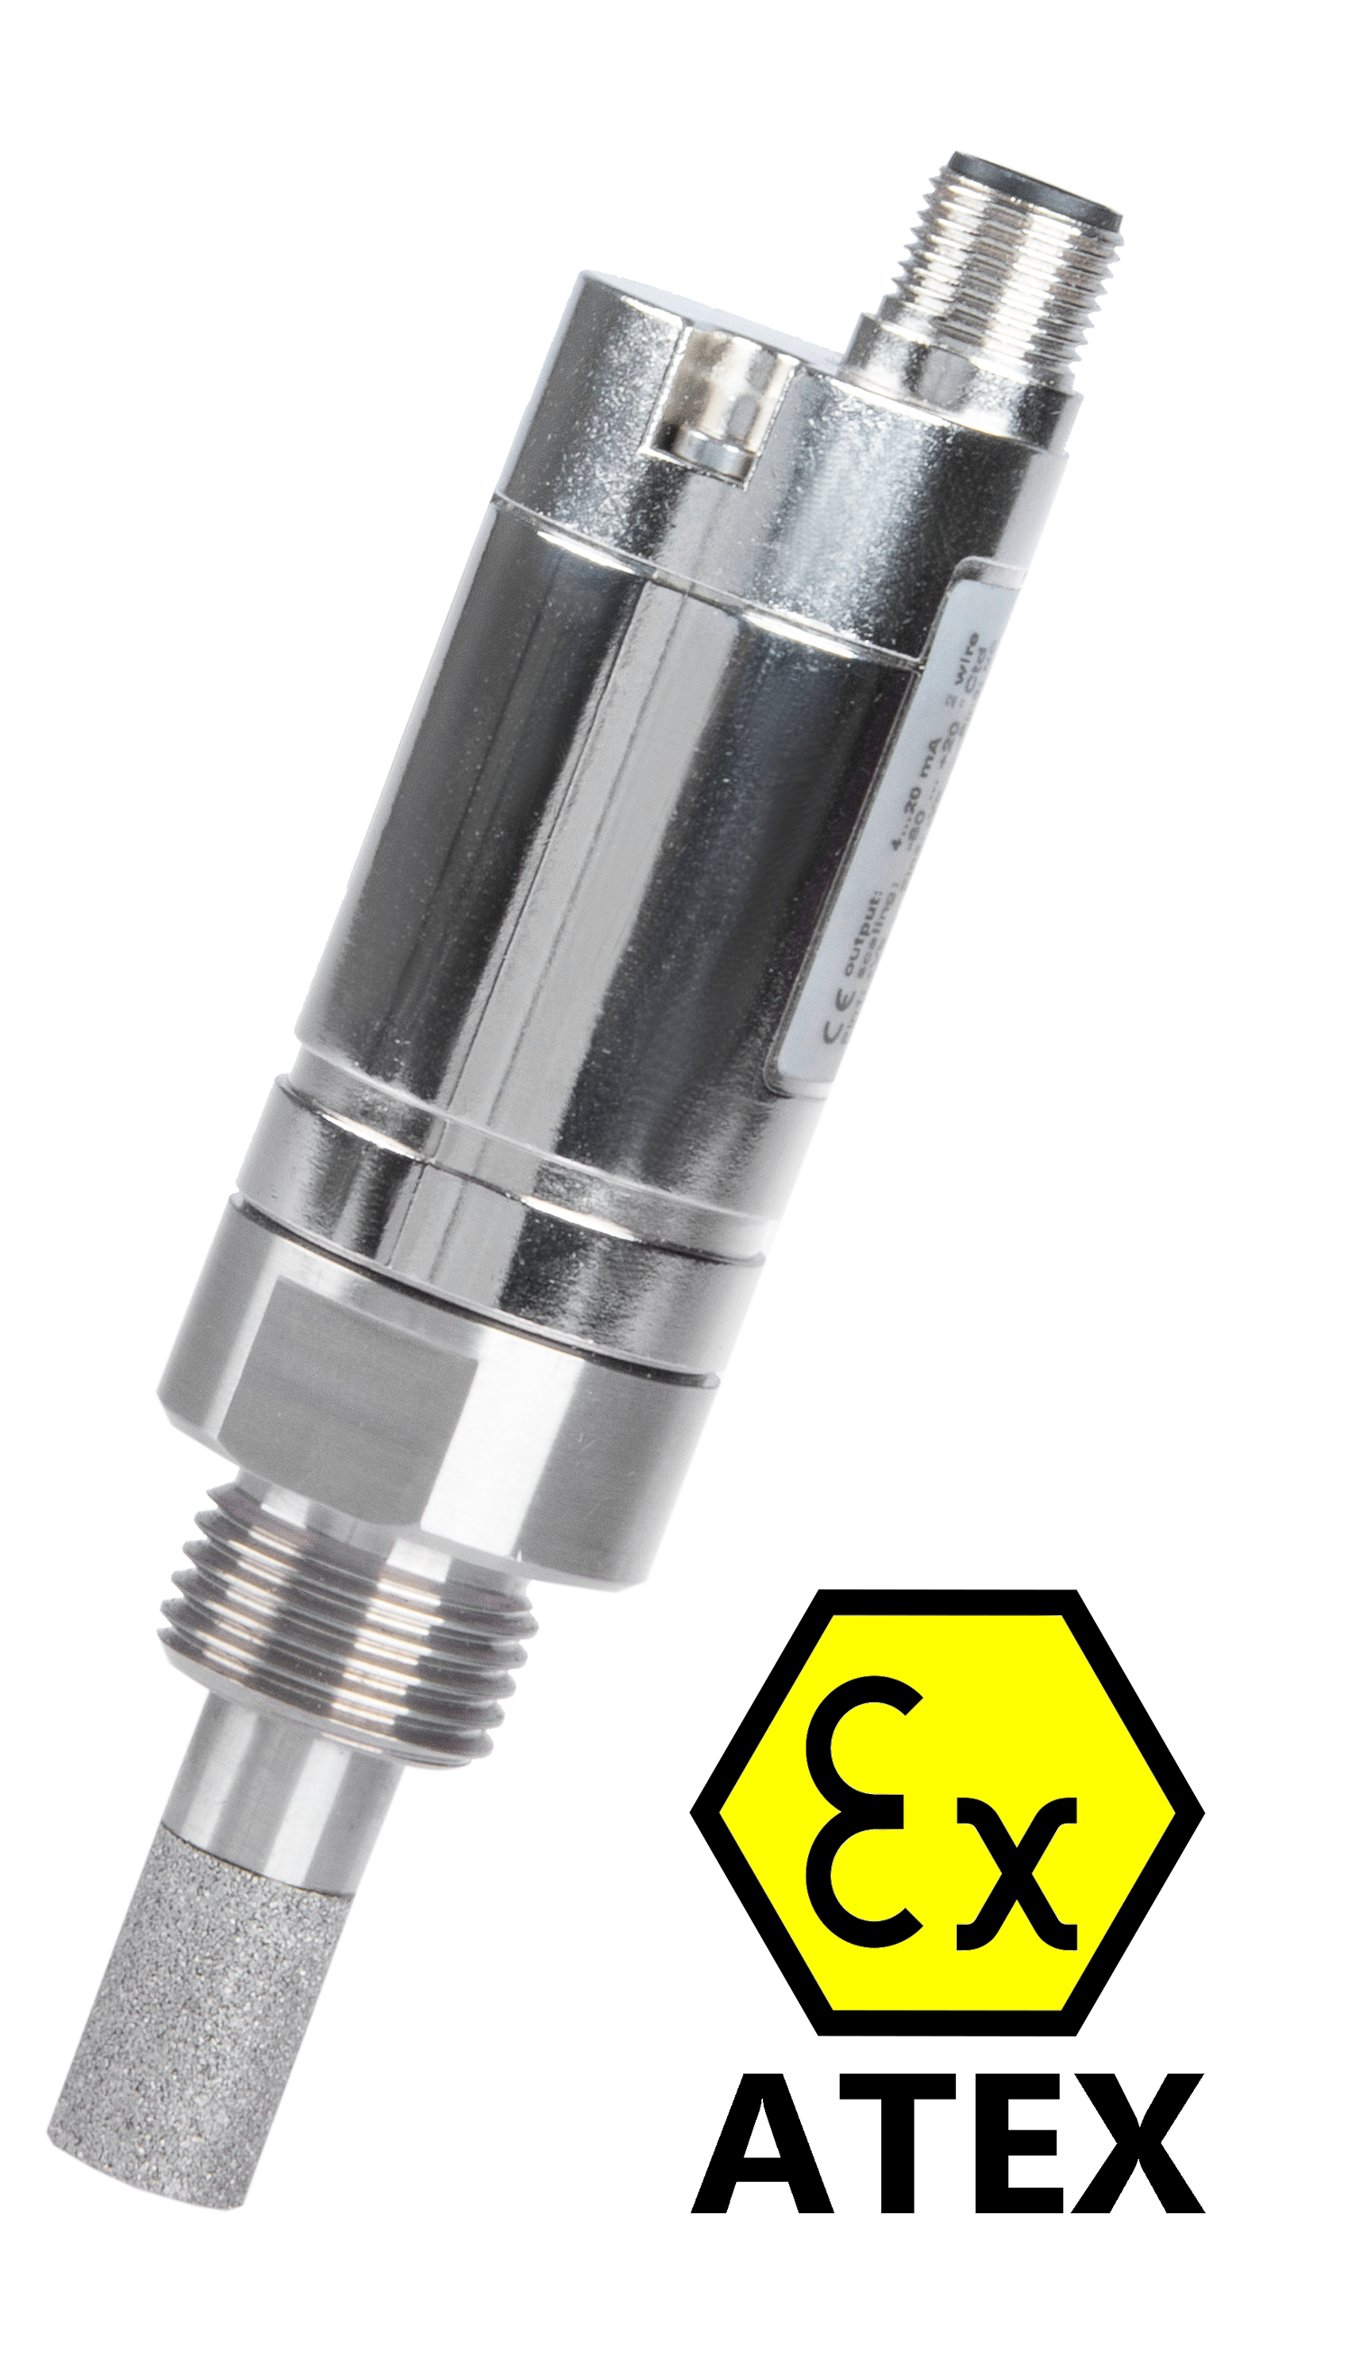 Dew point sensor FA 515 Ex with ATEX approval 